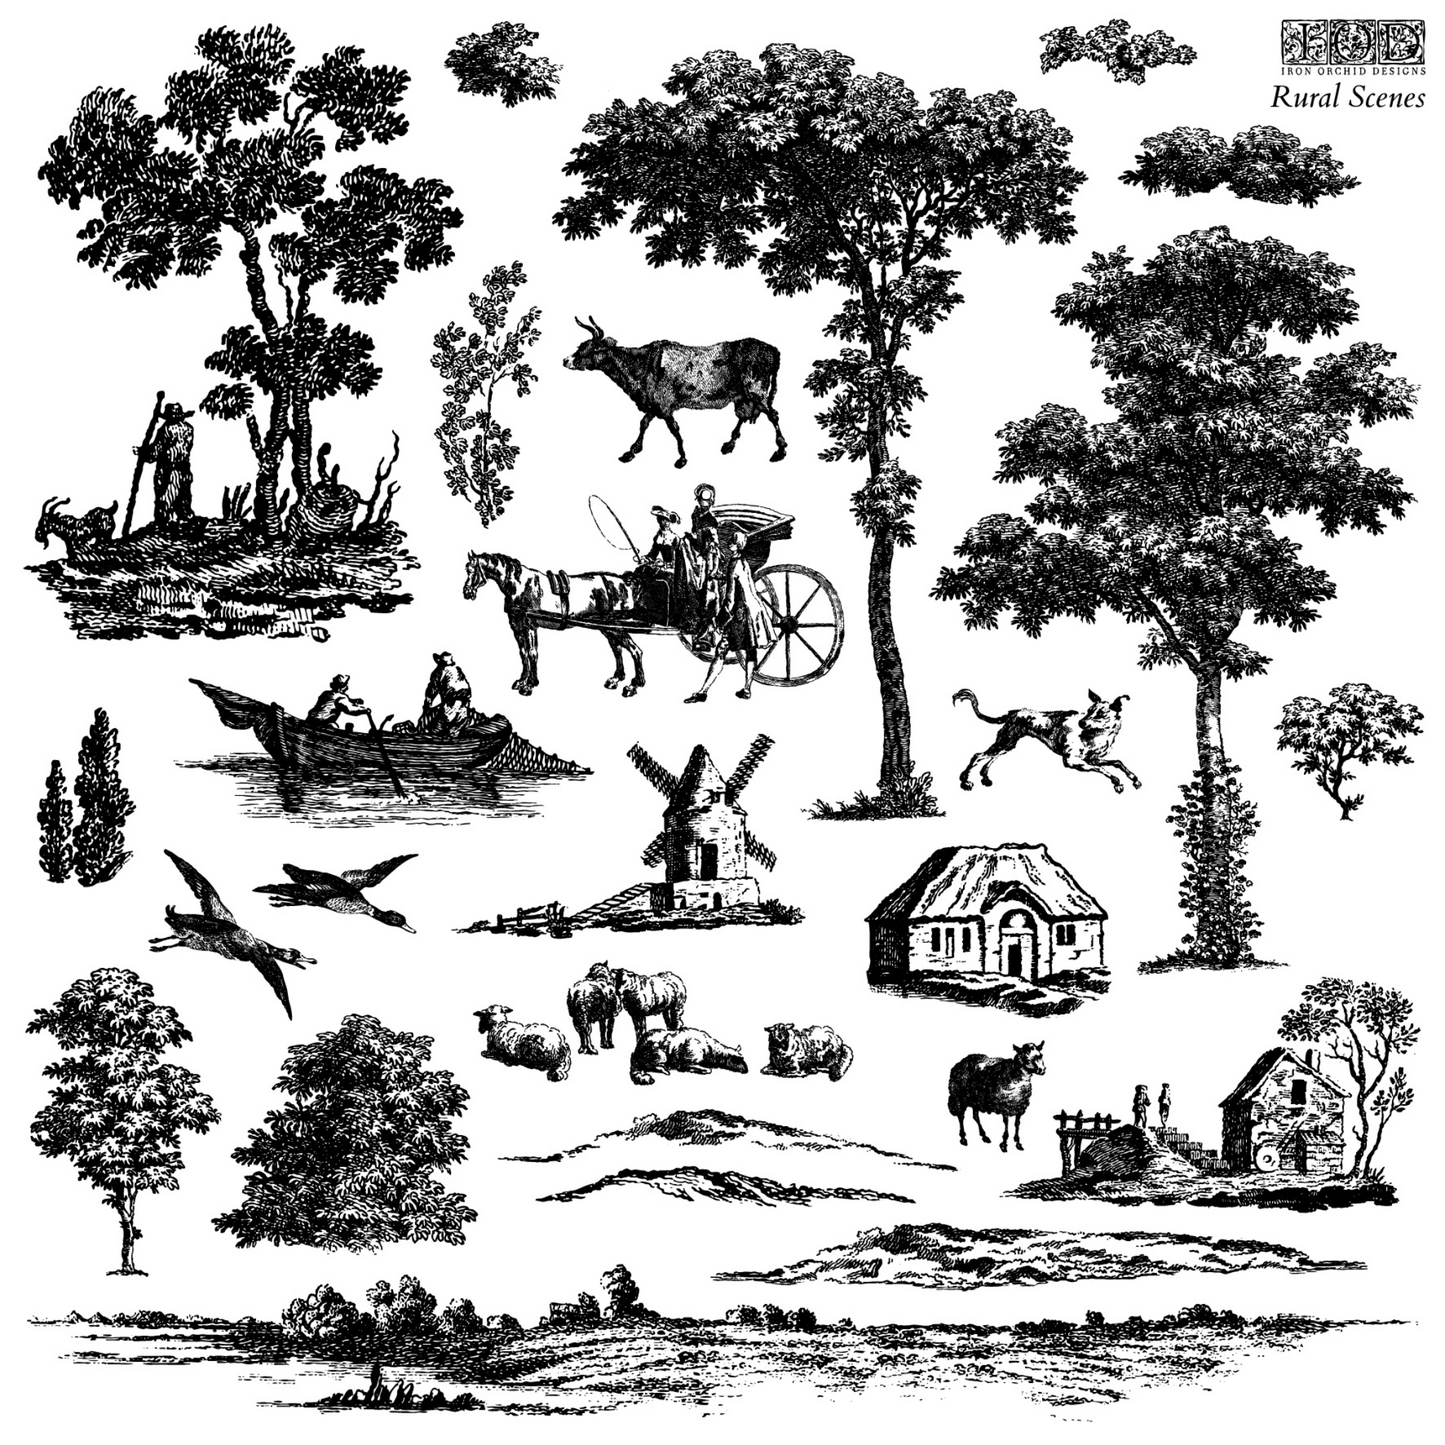 "Rural Scenes" IOD 2 sheet stamp by Iron Orchid Designs. Sheet 1 of 2. Available at Milton's Daughter.